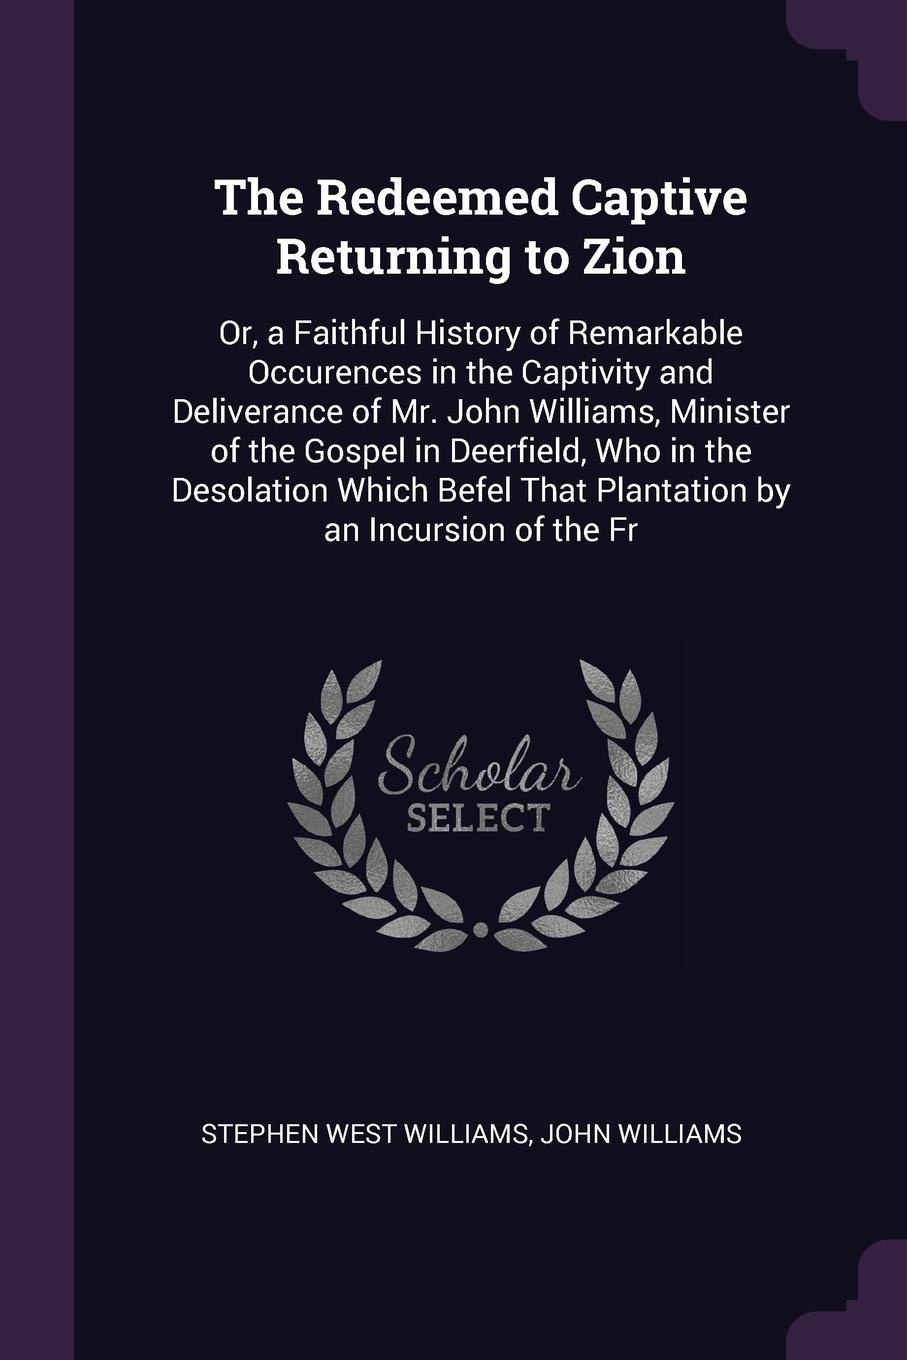 The Redeemed Captive Returning to Zion. Or, a Faithful History of Remarkable Occurences in the Captivity and Deliverance of Mr. John Williams, Minister of the Gospel in Deerfield, Who in the Desolation Which Befel That Plantation by an Incursion o...